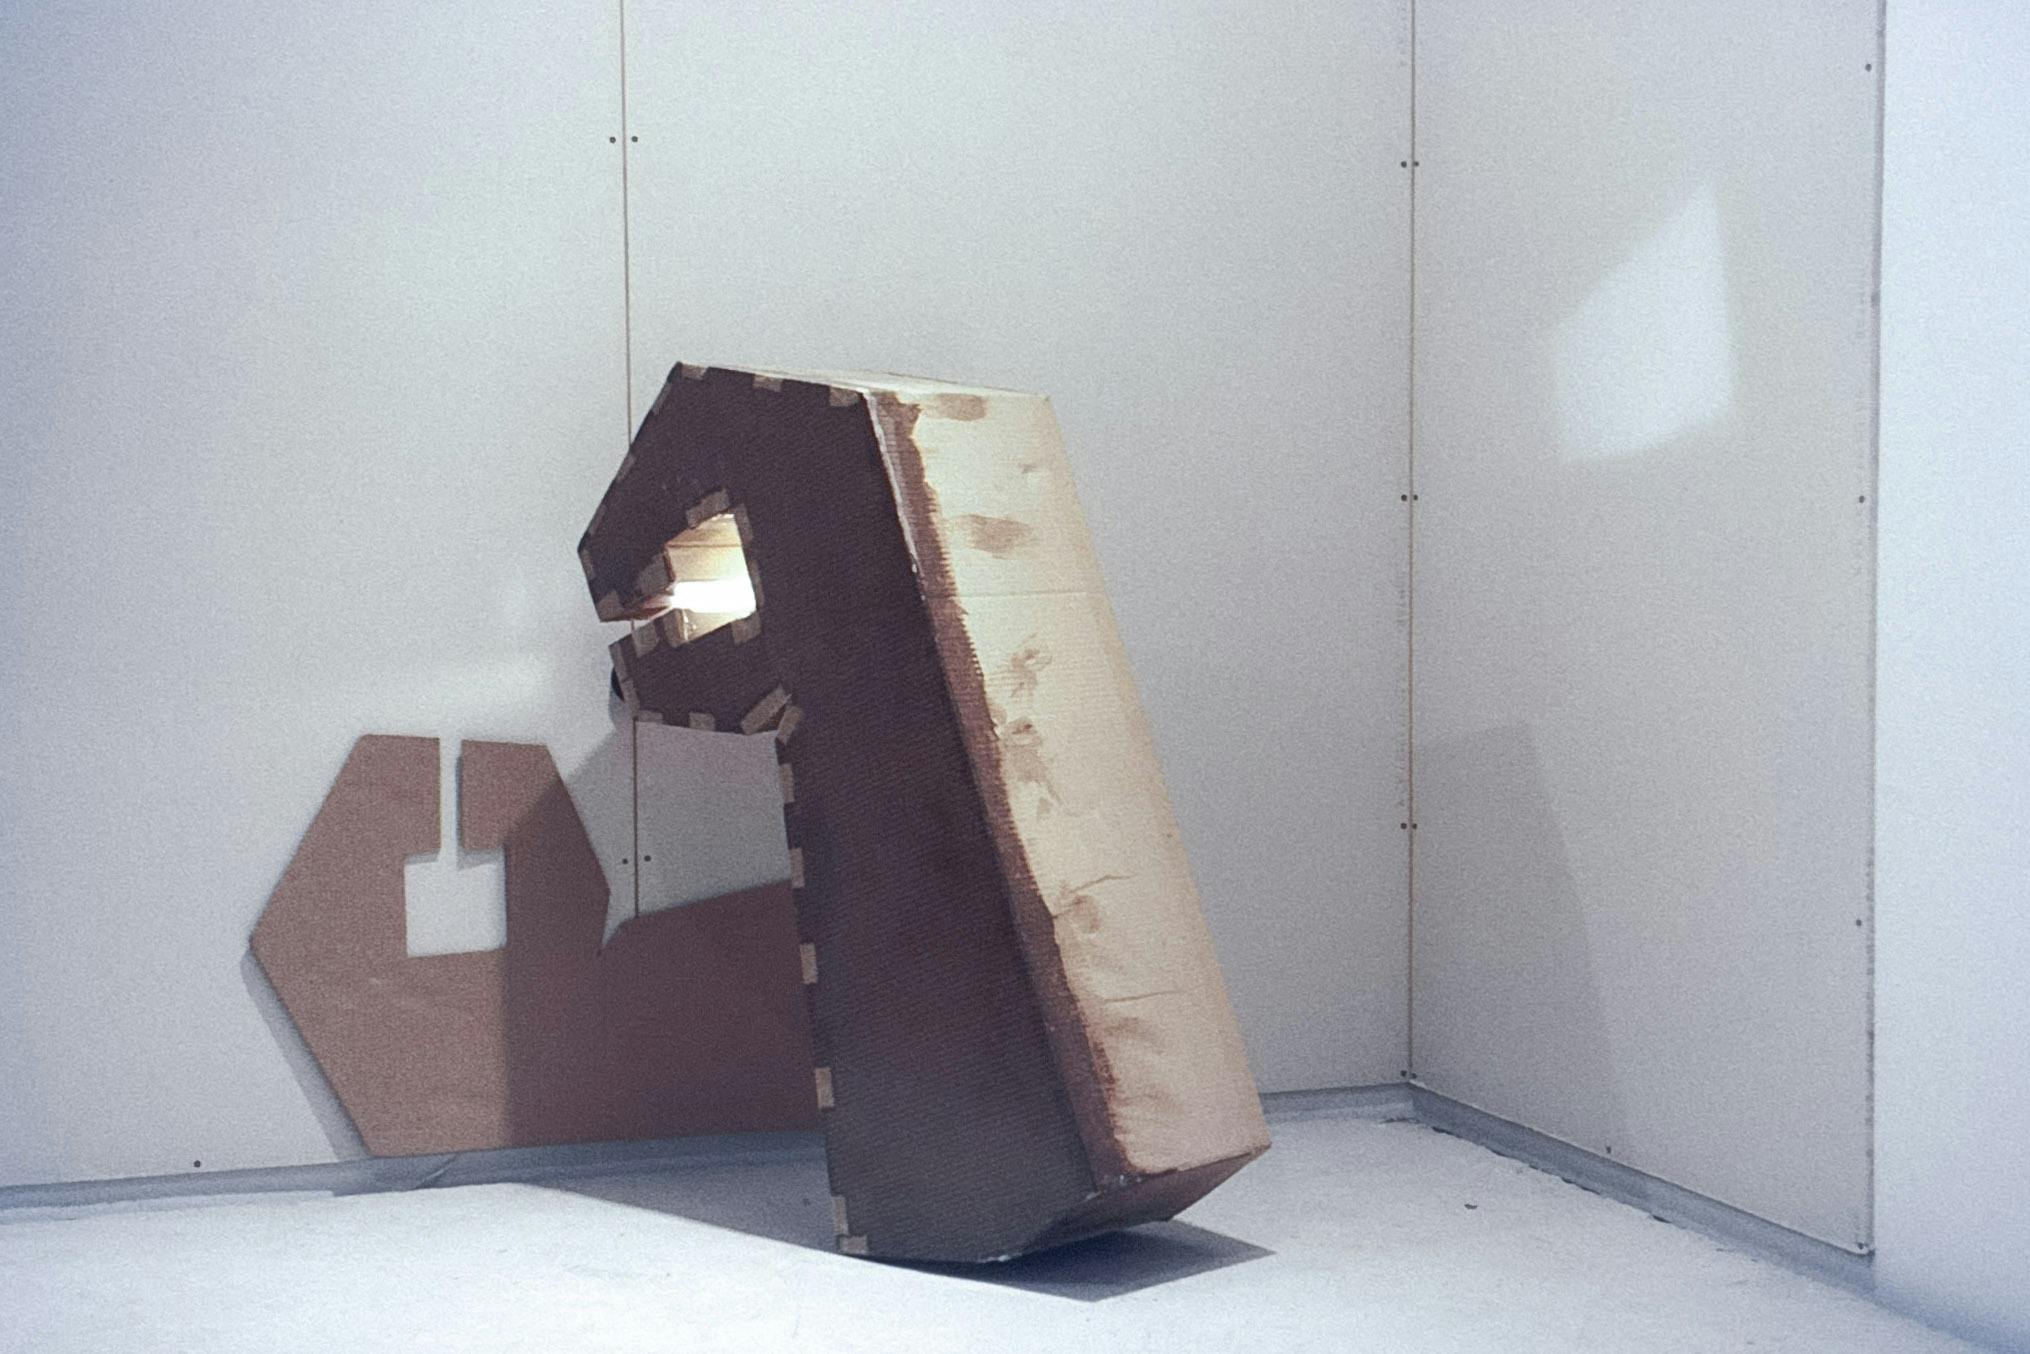 The corner of a gallery with 3 grey panels on the walls. Across 2 panels there is a flat, wrench-shaped cardboard piece. This shape is repeated in 3D, leaning on the wall with a light in its "jaw." 